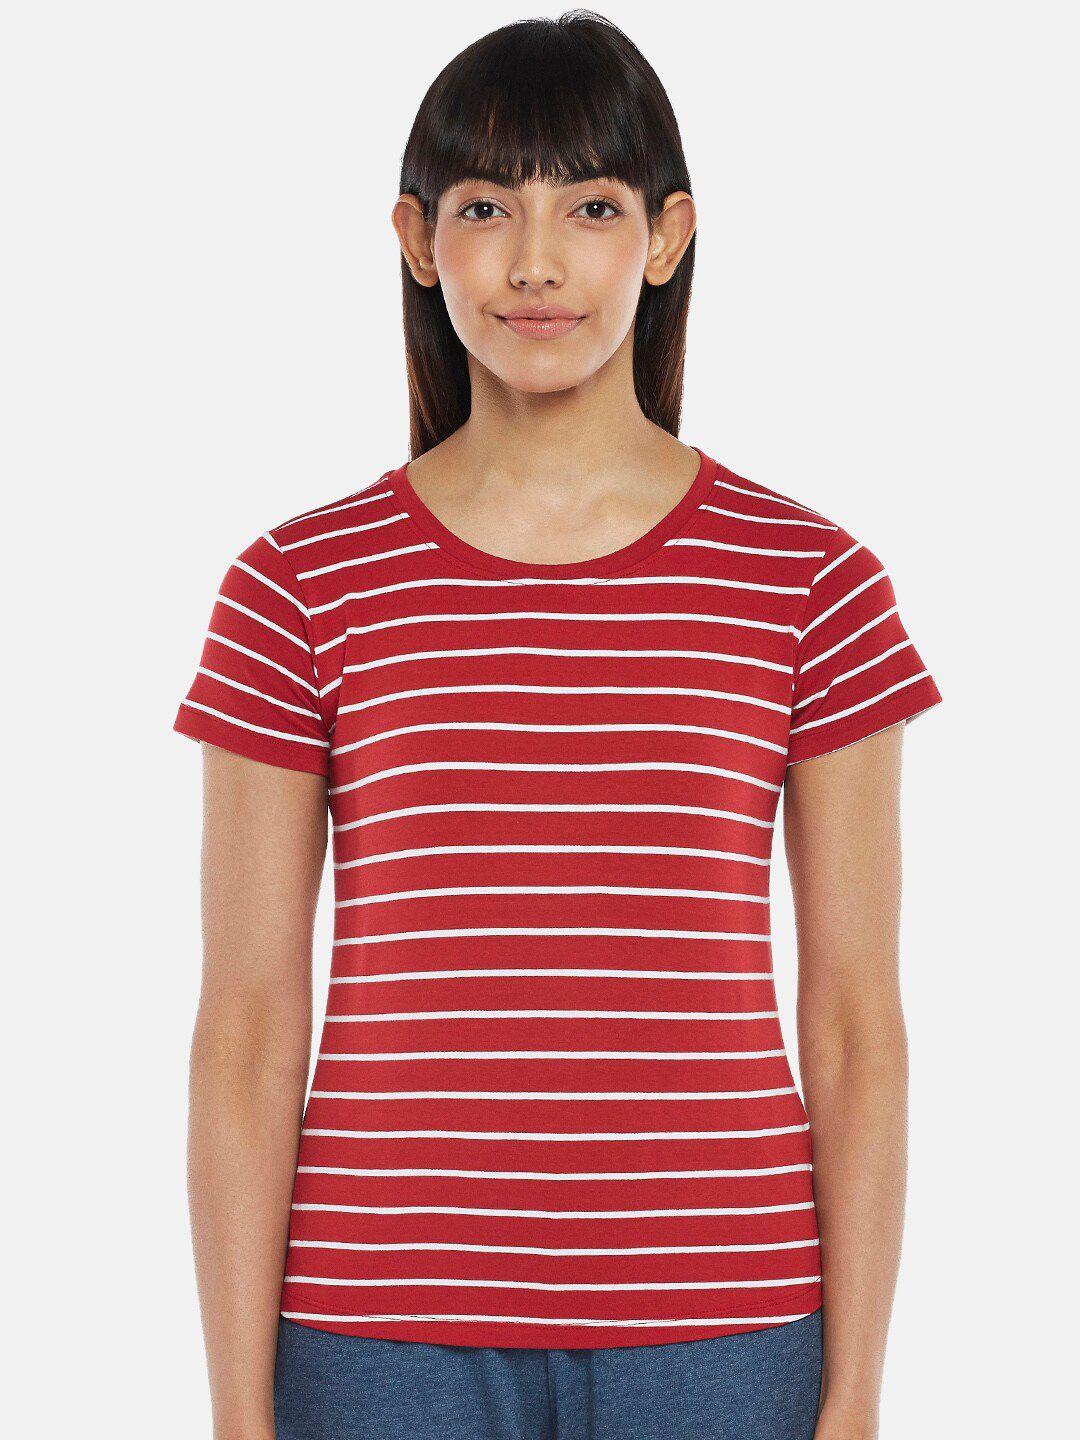 dreamz-by-pantaloons-red-striped-top